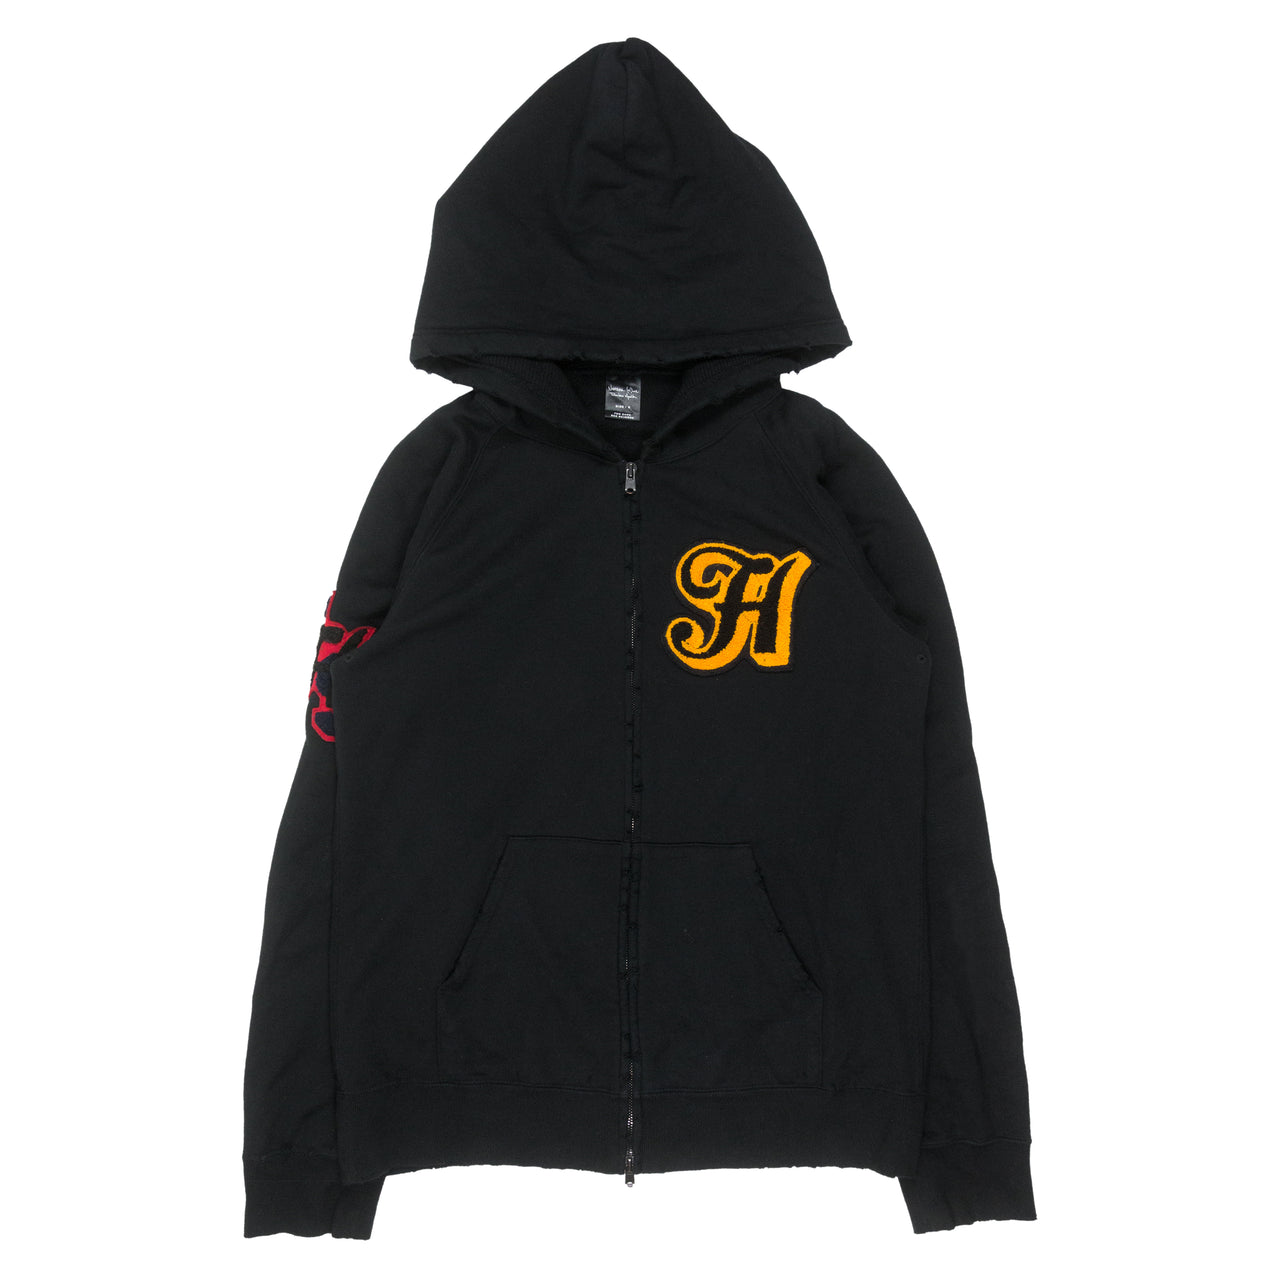 Number (N)ine "The High Streets" Black Hoodie - AW05 "The High Streets"